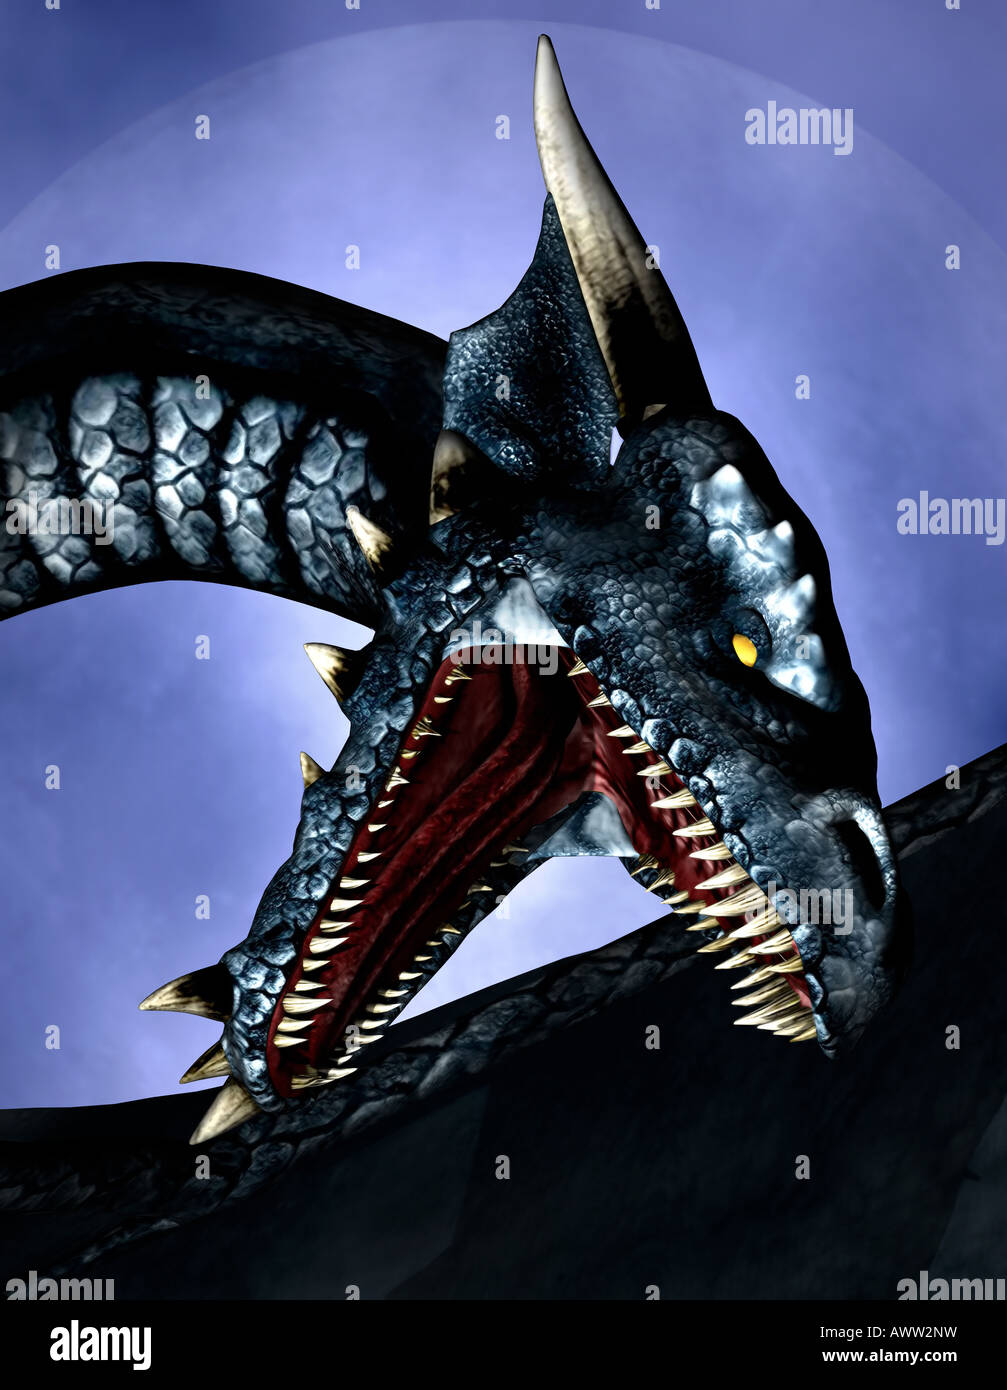 Dragon With Mouth Open Fantasy Dragon Open Mouth Hd Dreamy Wallpapers